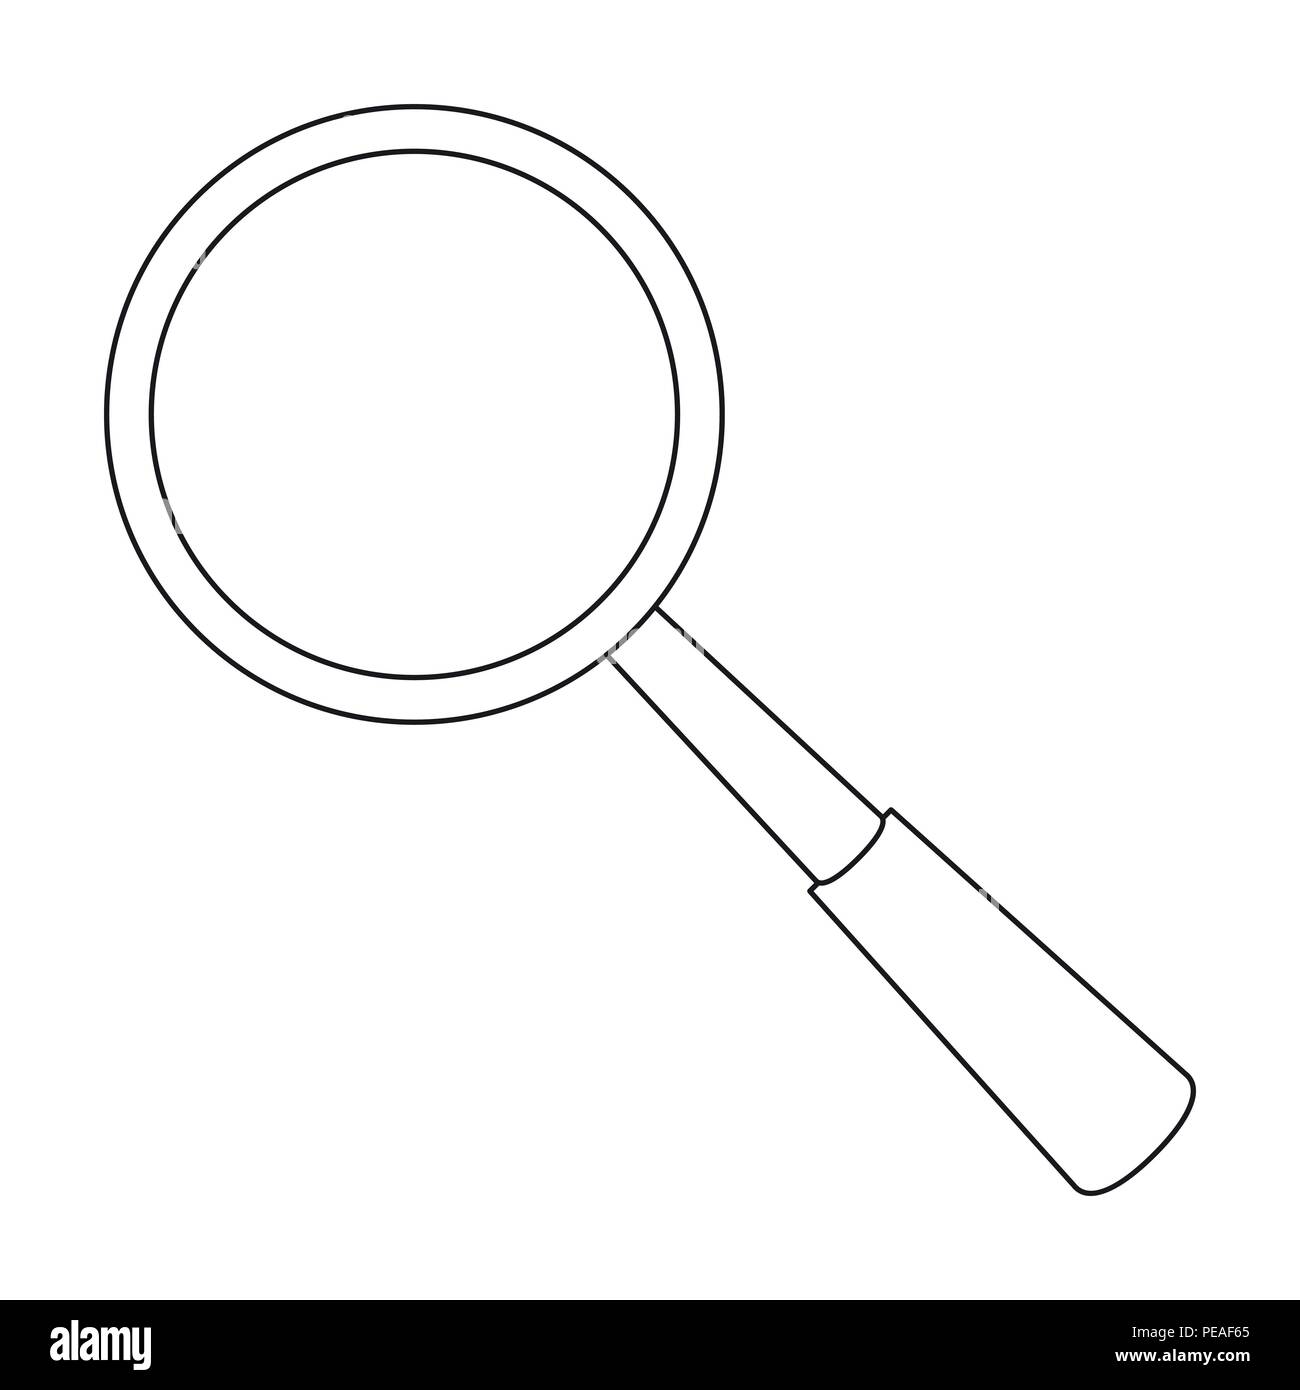 Magnifying glass with coins isolated over white Vector Image